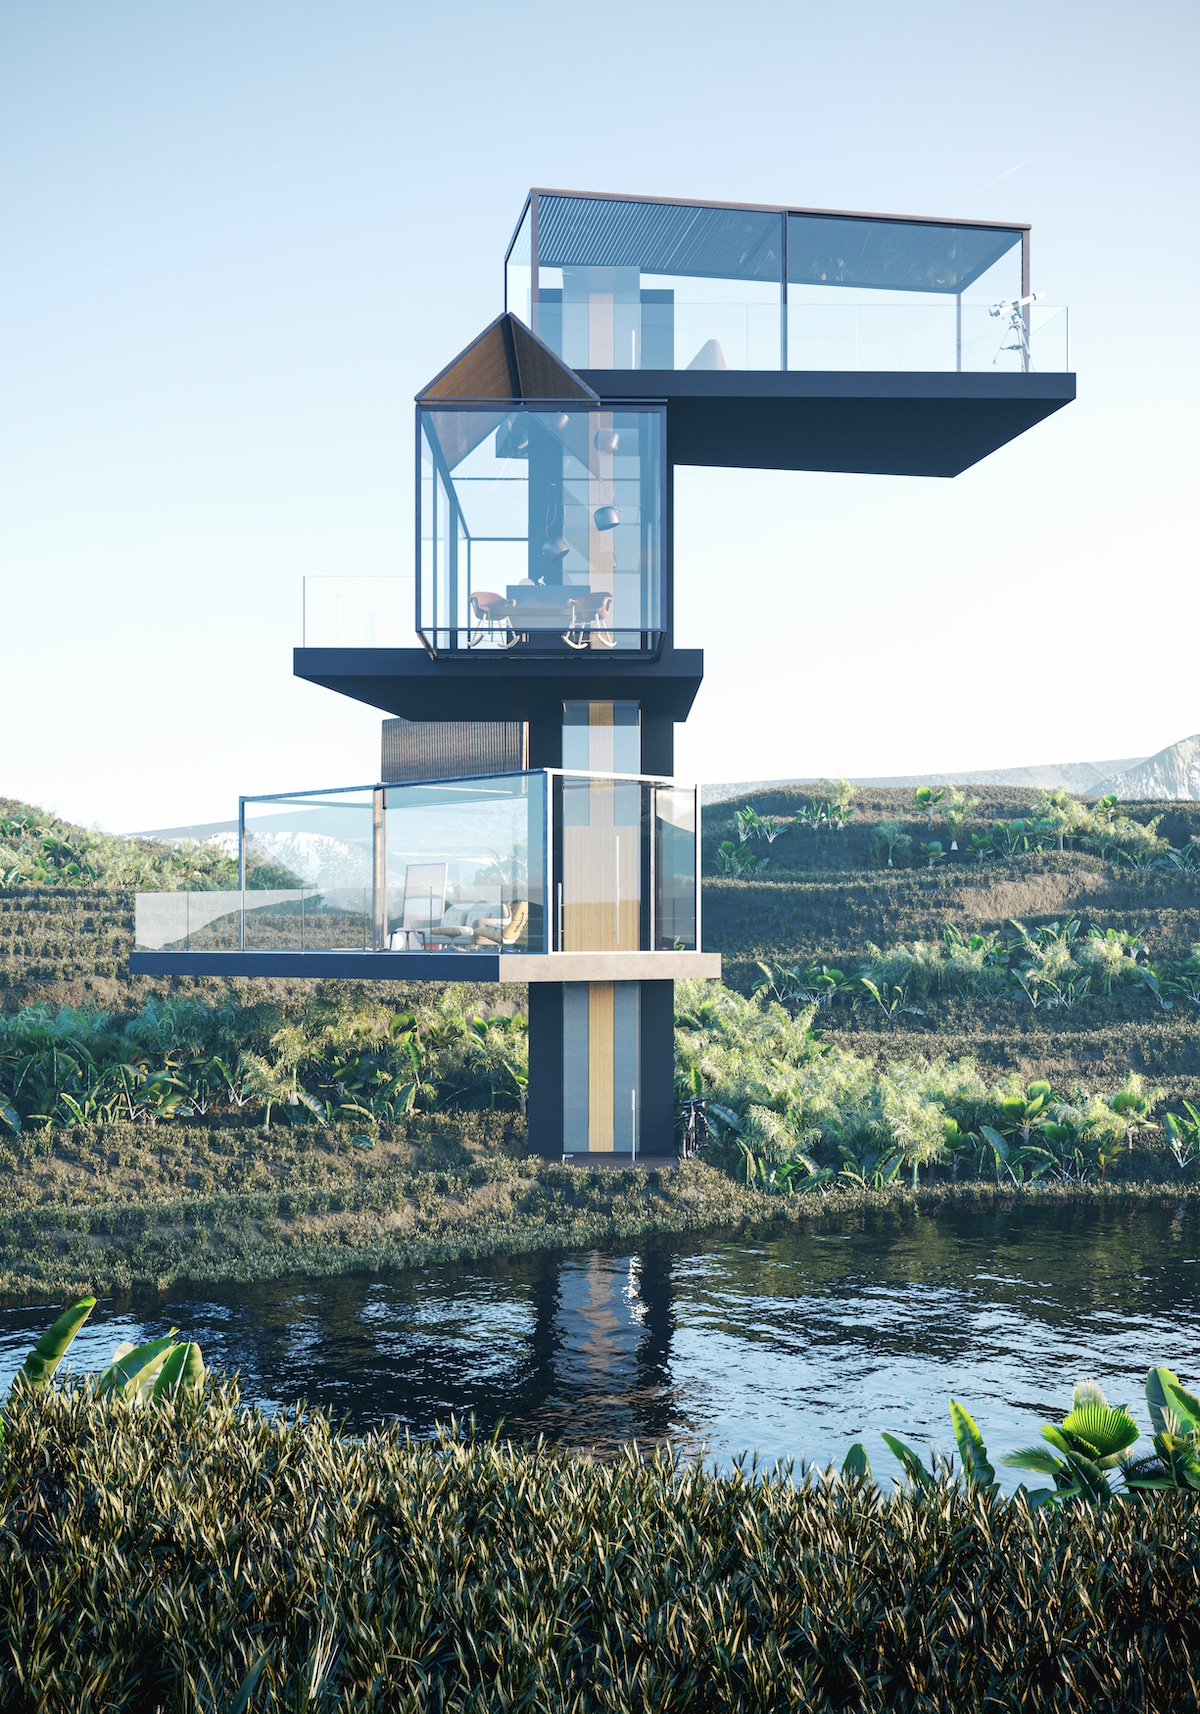 Exterior View of Adriano Design's House on the Rice Paddy